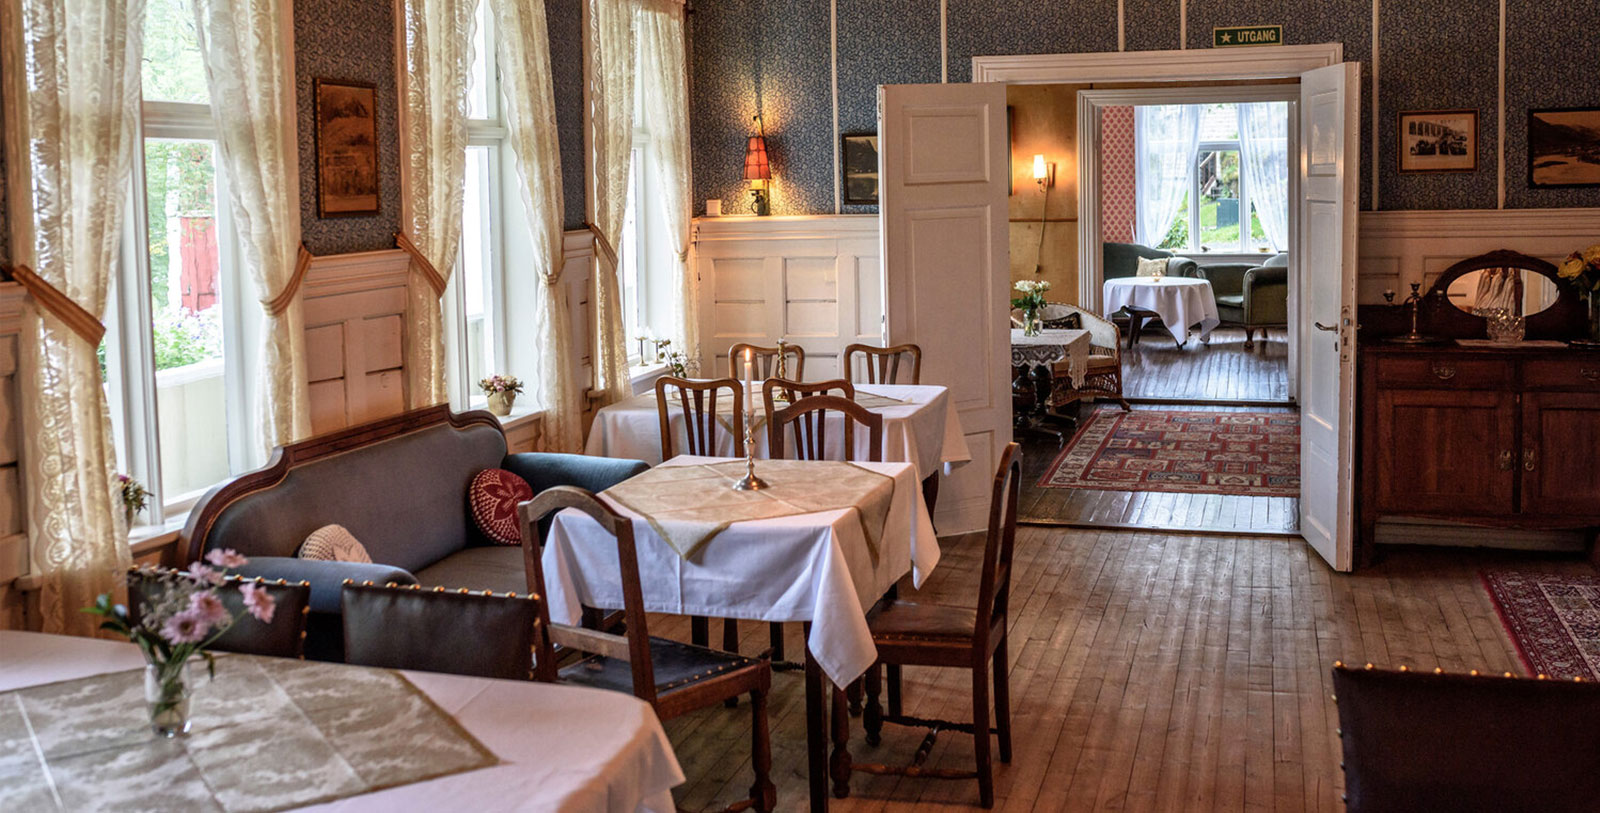 Image of the main dining room at Visnes Hotel Stryn, 1850, a member of Historic Hotels Worldwide in Stryn, Norway